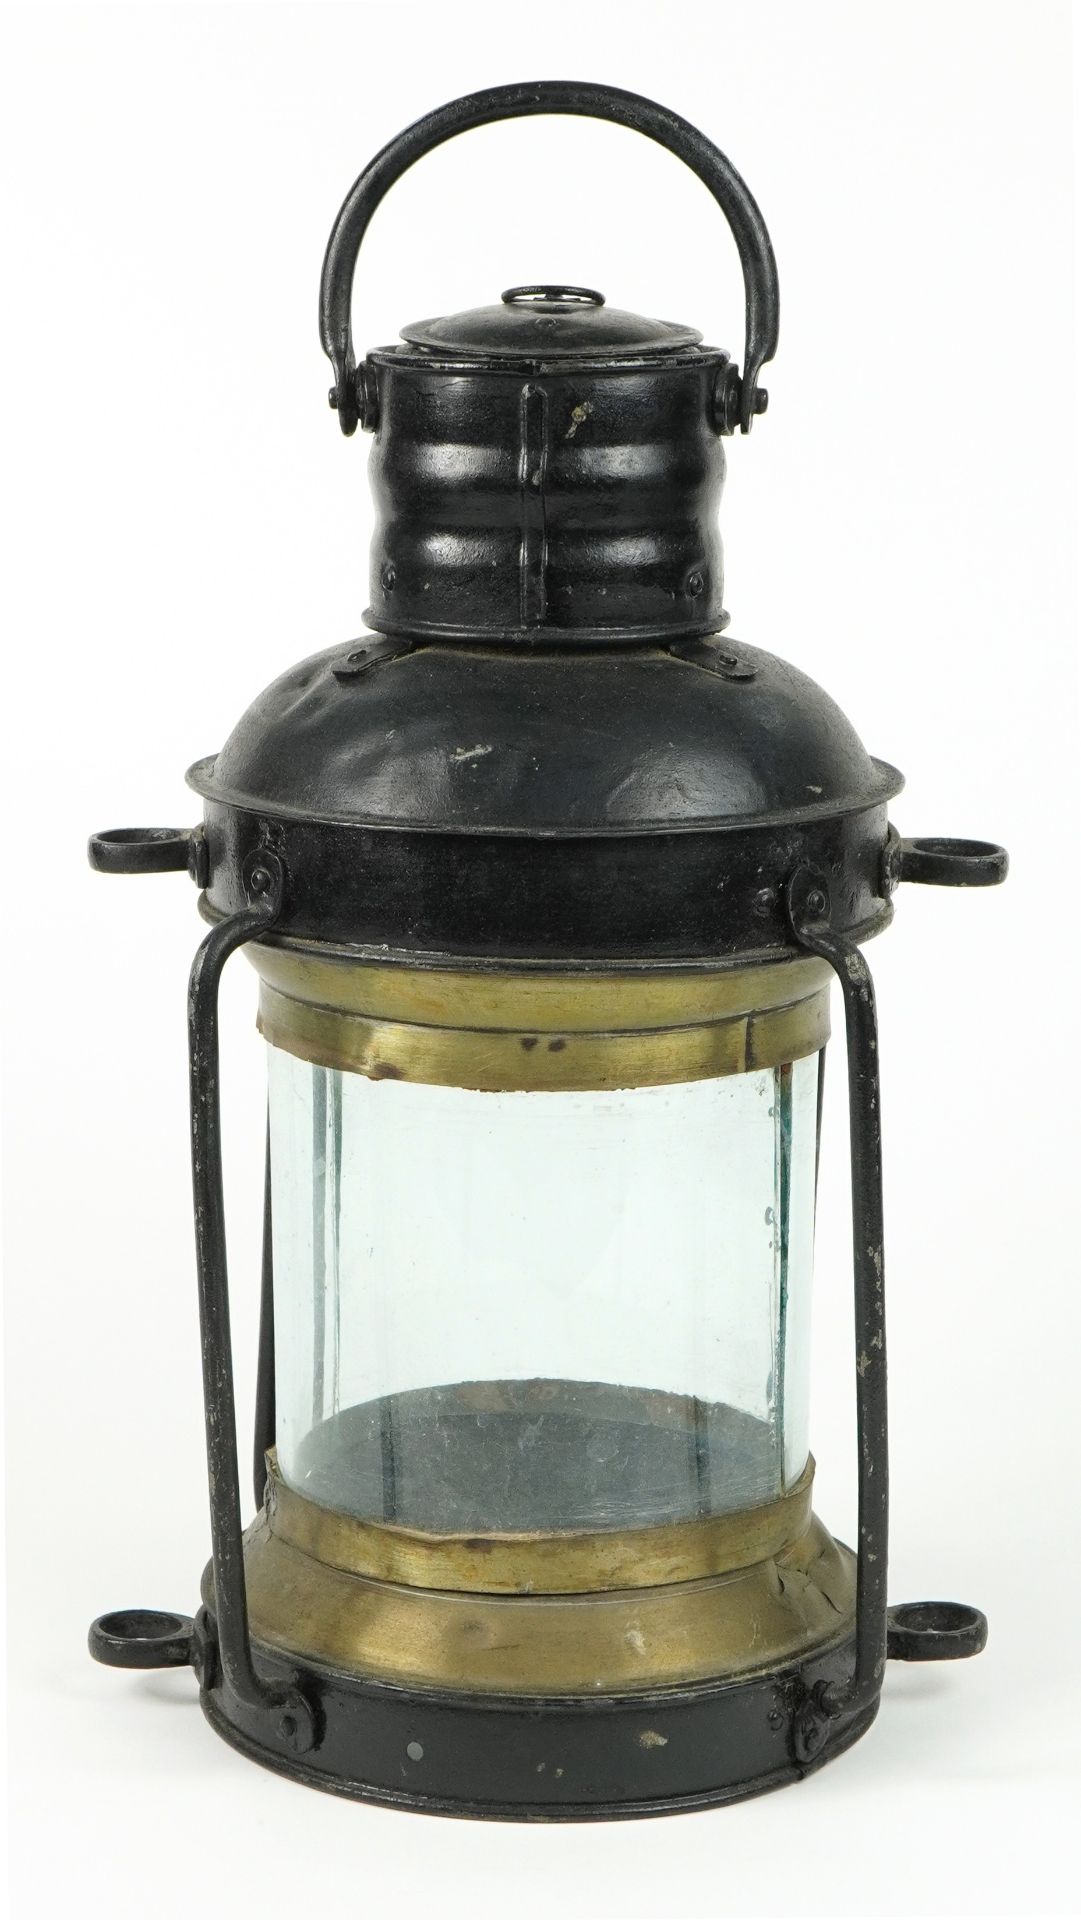 Antique shipping interest ship's hanging lantern with glass panel, 42cm high excluding the